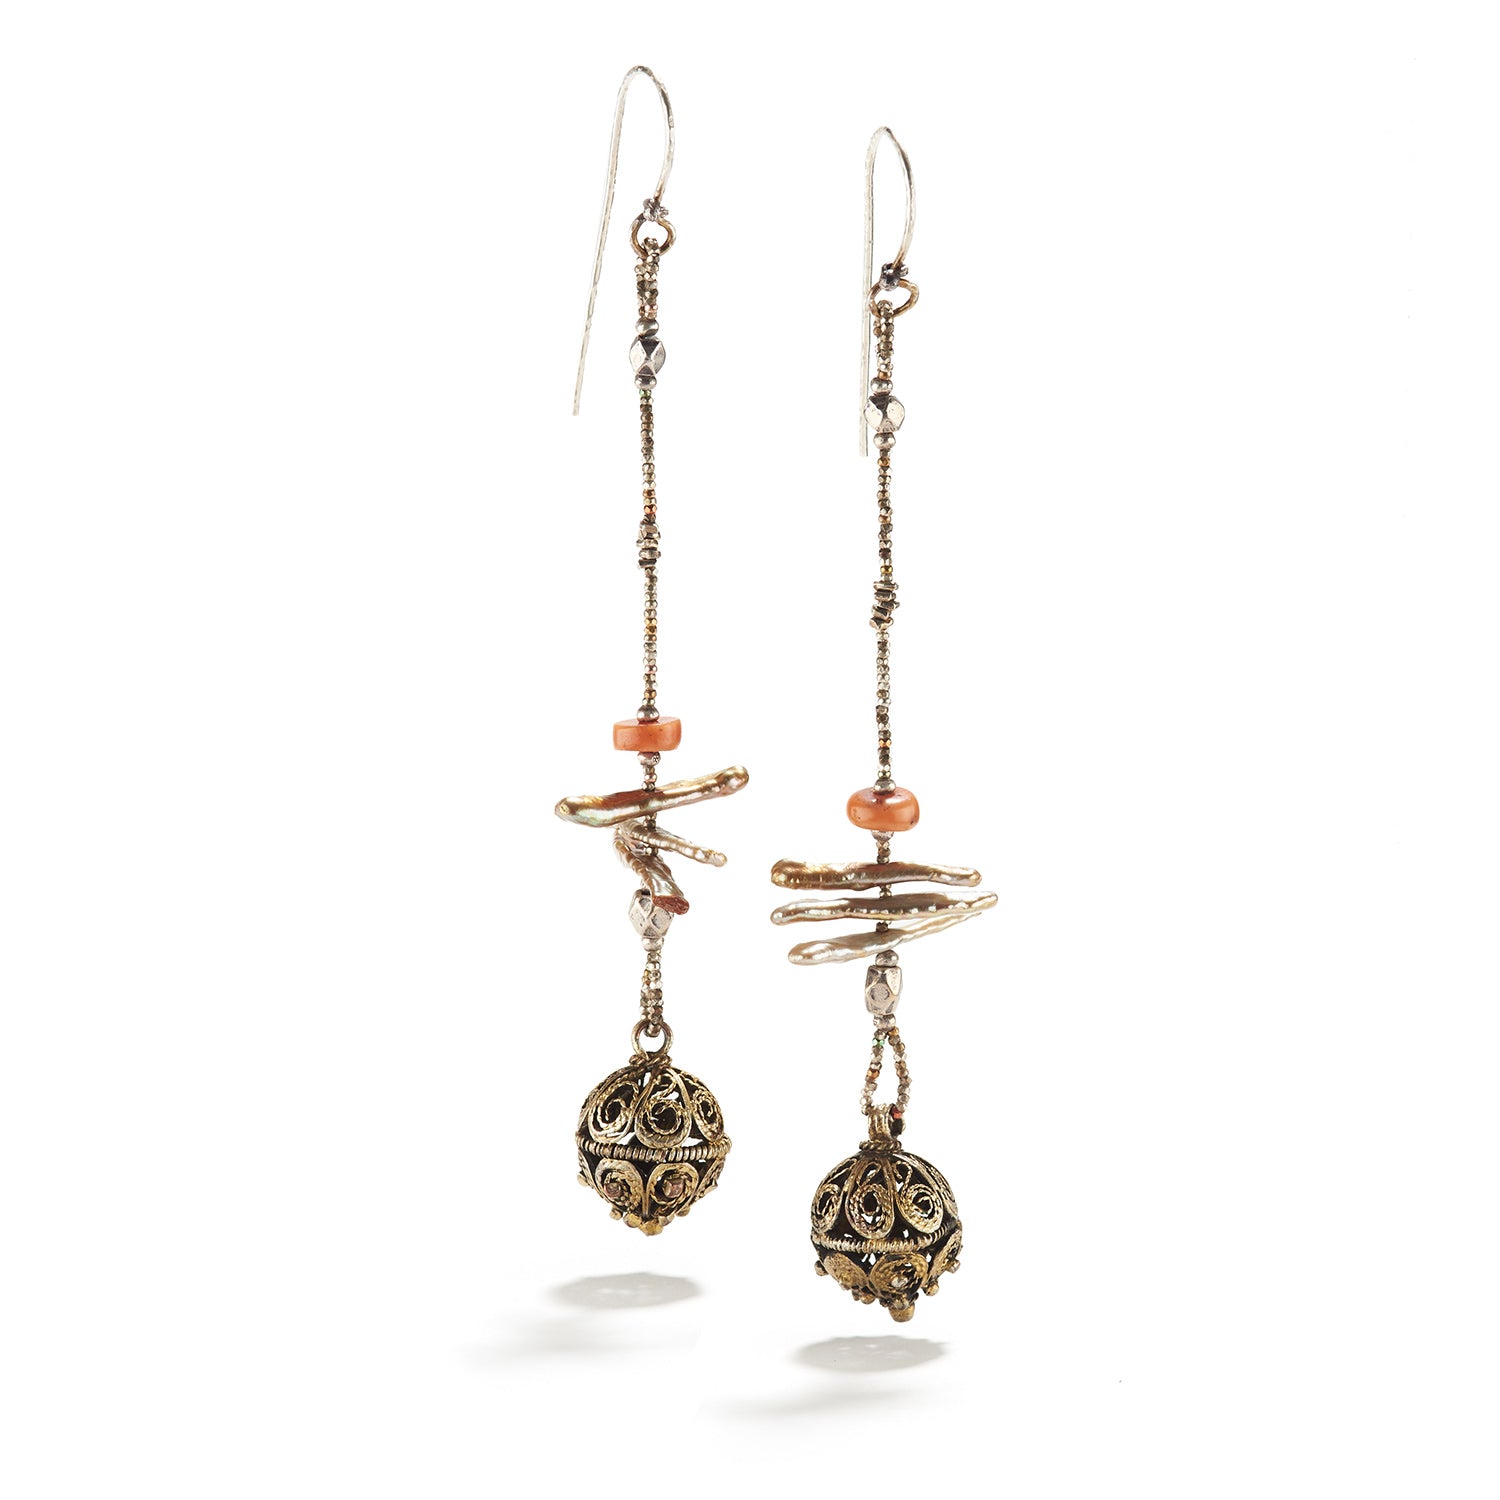 Antique Filigree, Pearl and Coral Earrings